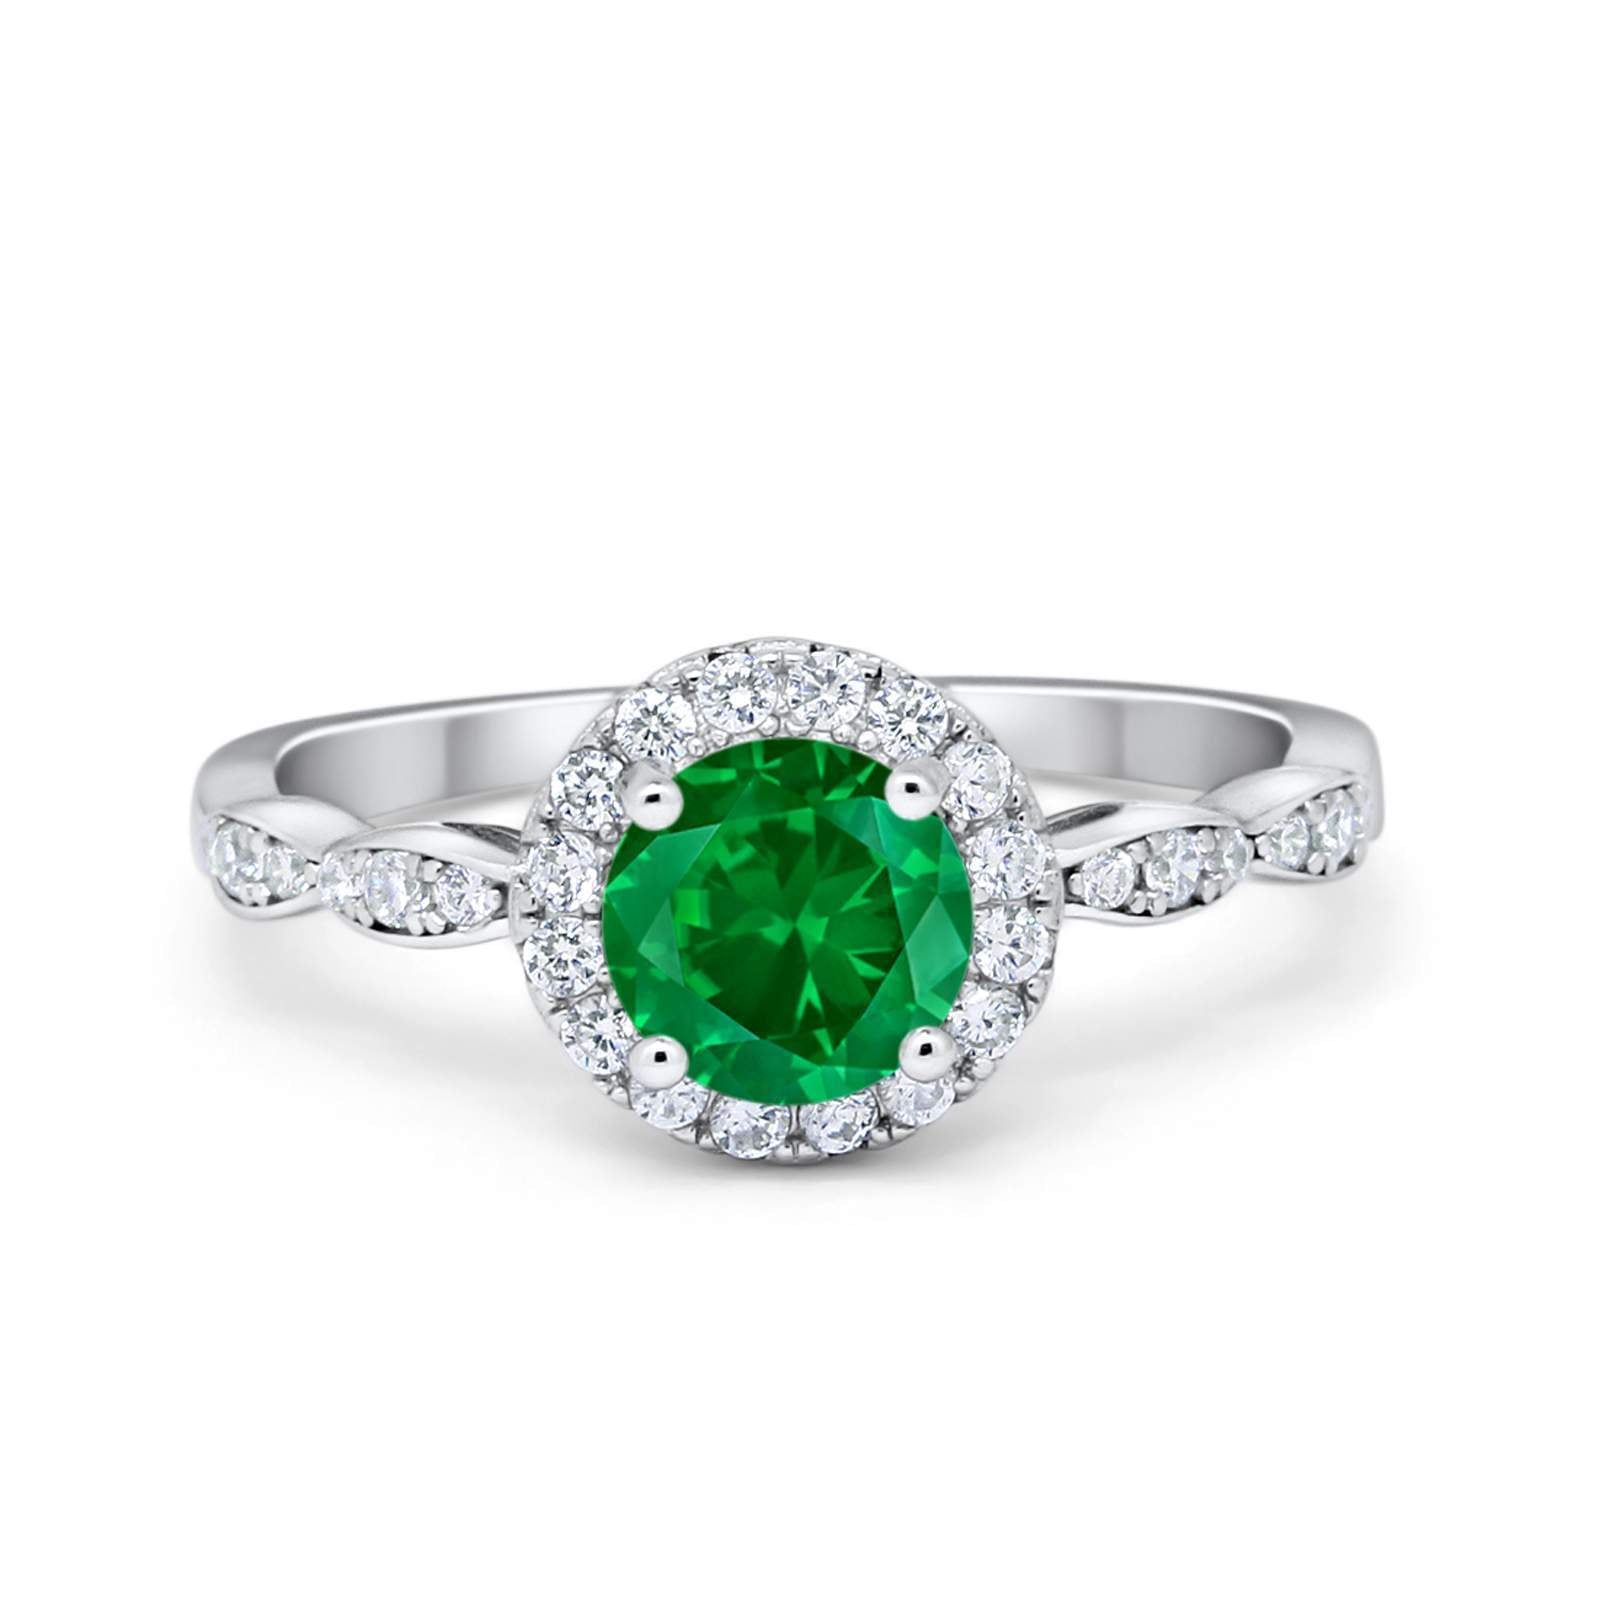 Art Deco Design Engagement Ring Simulated Green Emerald CZ 925 Sterling Silver